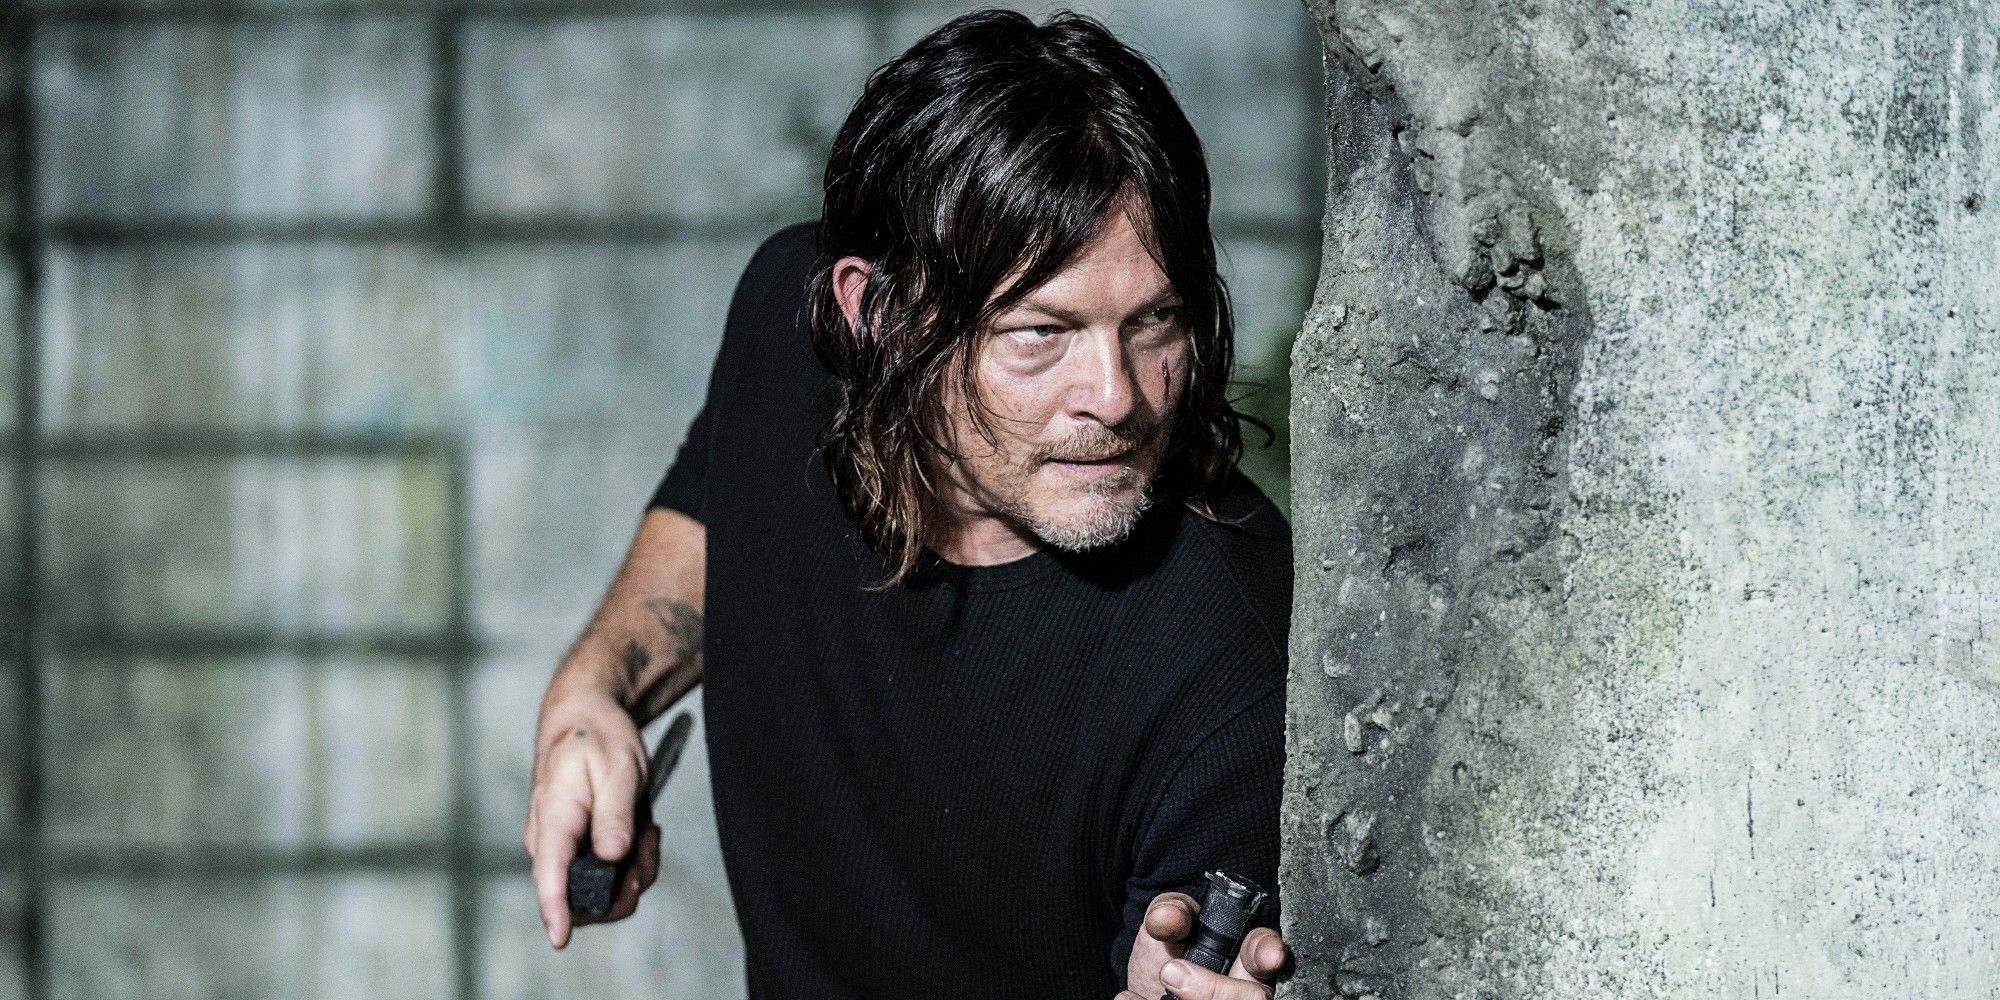 Norman Reedus as Daryl on The Walking Dead season 11 holding knives and peering around a corner